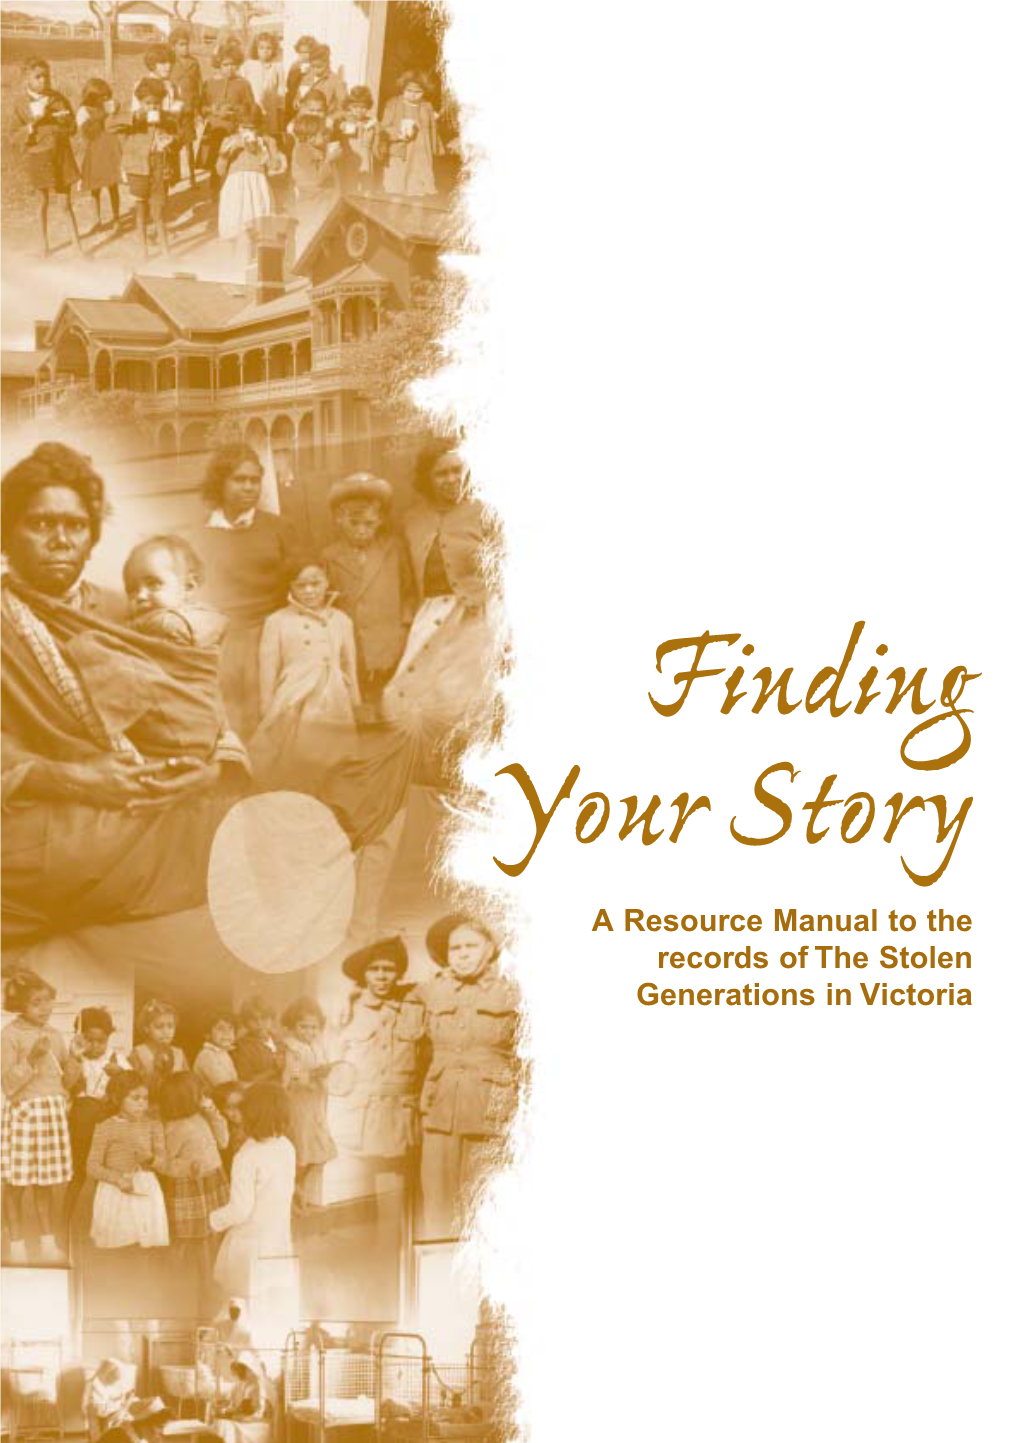 To Download a Free Pdf Version of Finding Your Story